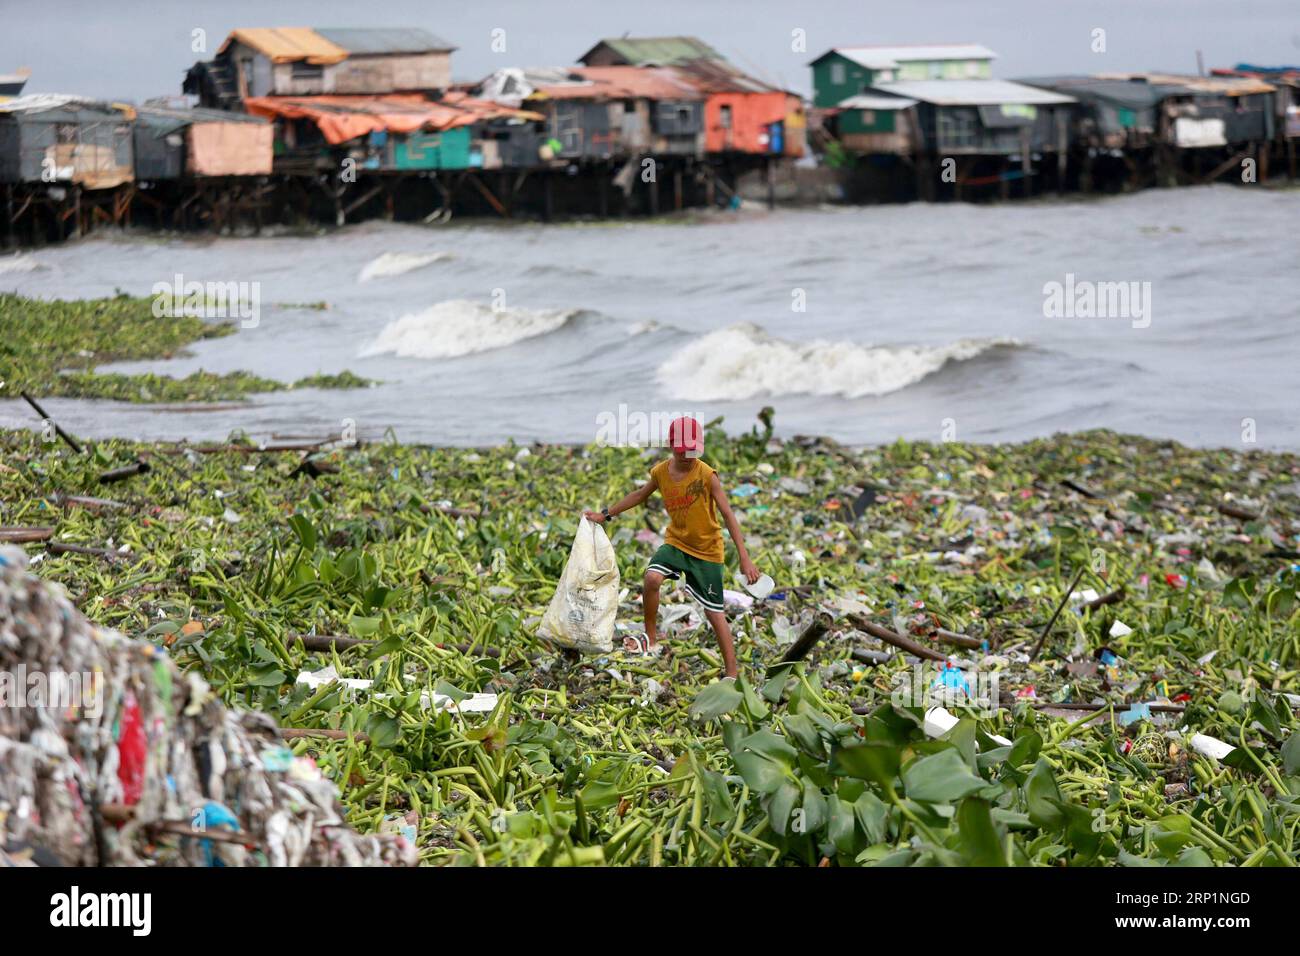 (180716) -- MANILA, July 16, 2018 -- A child walks on water lilies and garbage as he gathers reusable materials washed ashore by the tropical depression Henry in Manila, the Philippines, July 16, 2018. )(zhf) THE PHILIPPINES-MANILA-TROPICAL DEPRESSION HENRY ROUELLExUMALI PUBLICATIONxNOTxINxCHN Stock Photo